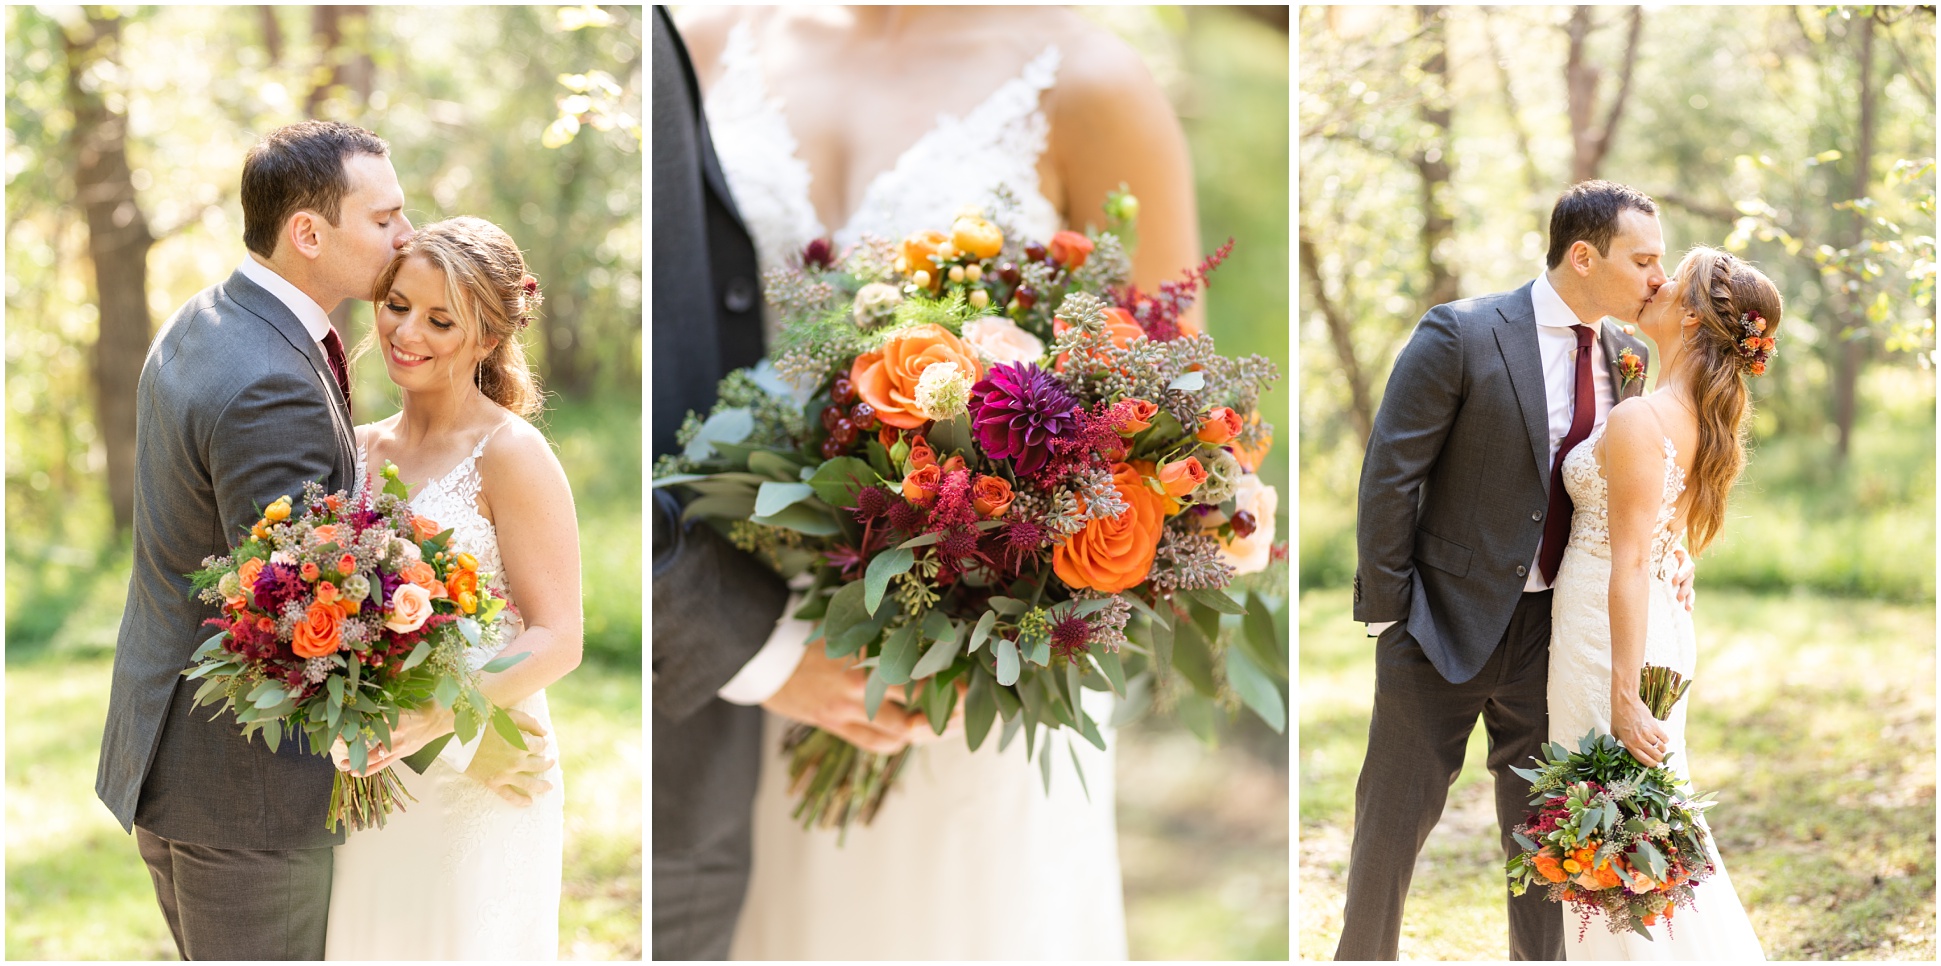 THREE IMAGES OF THE BRIDE AND GROOM AT WINDING CREEK FARM IN VIRGINIA. PHOTOGRAPHED BY MAEWOOD PHOTOGRAPHY